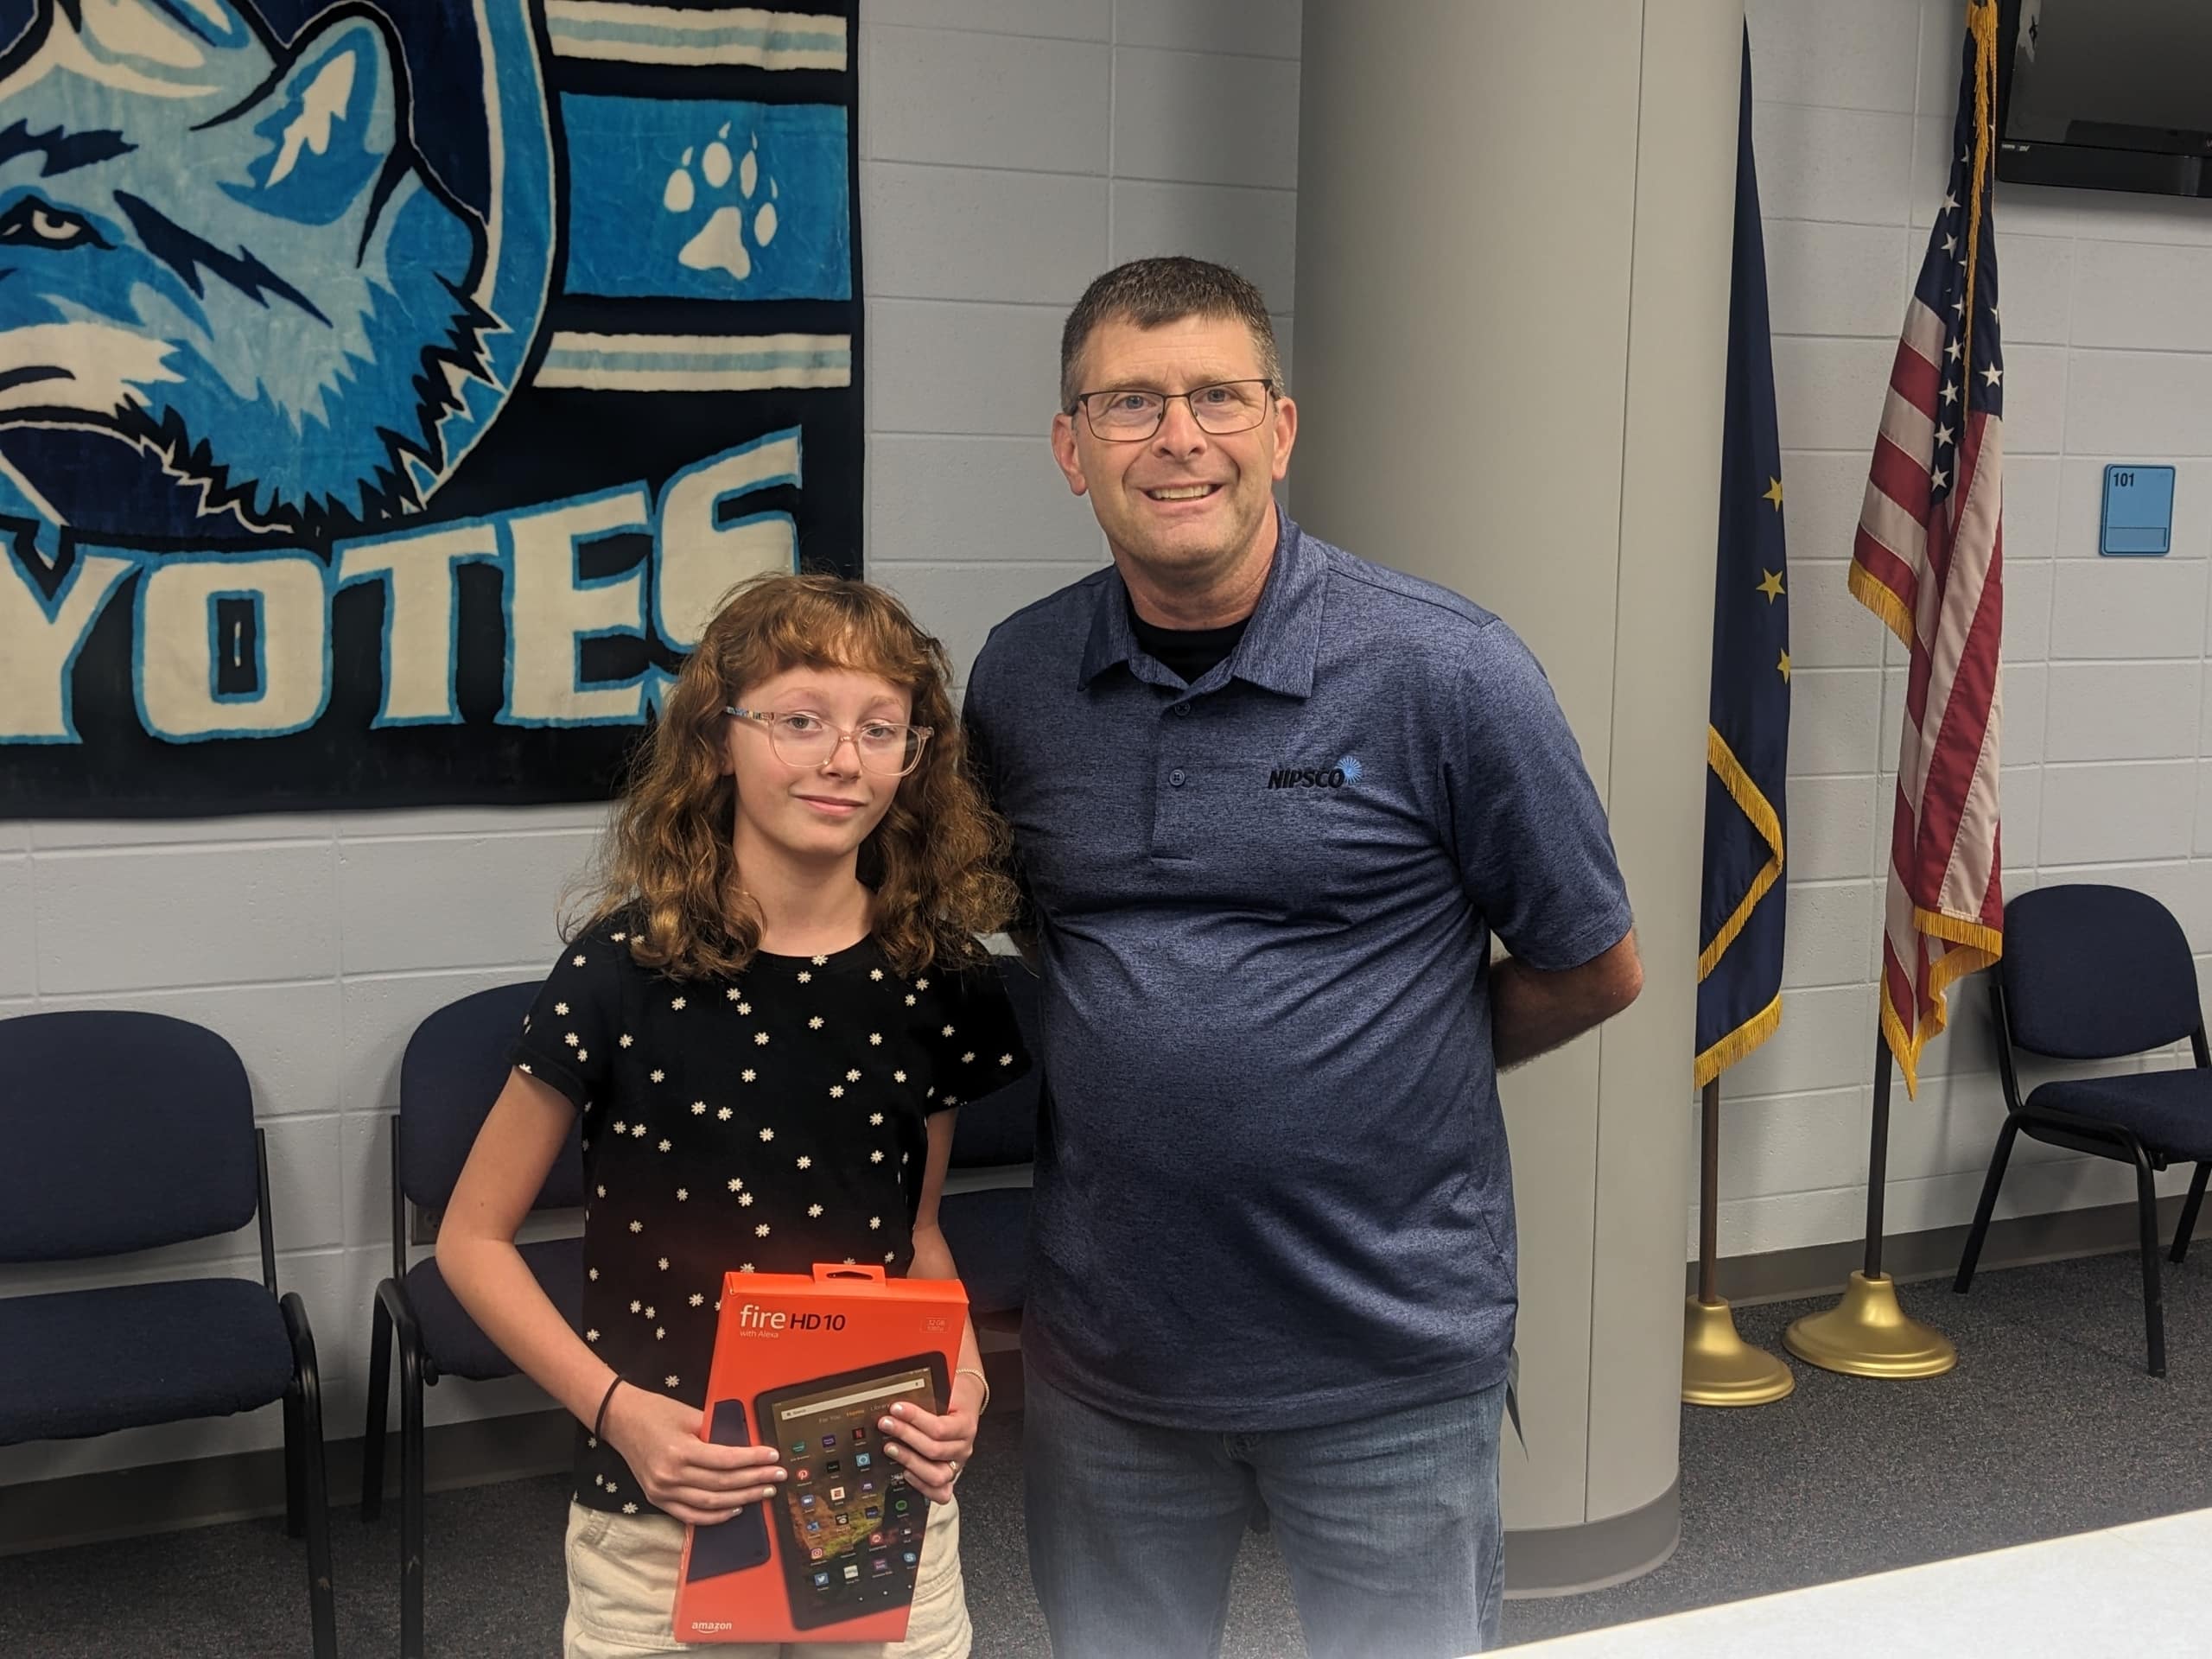 Clark 5th grader, Emily Solorio, was awarded a Kindle Fire Tablet courtesy of NIPSCO. Emily won the contest by creating an amazing poster for NIPSCO's "Call Before You Dig" promotion. Way to go Emily!